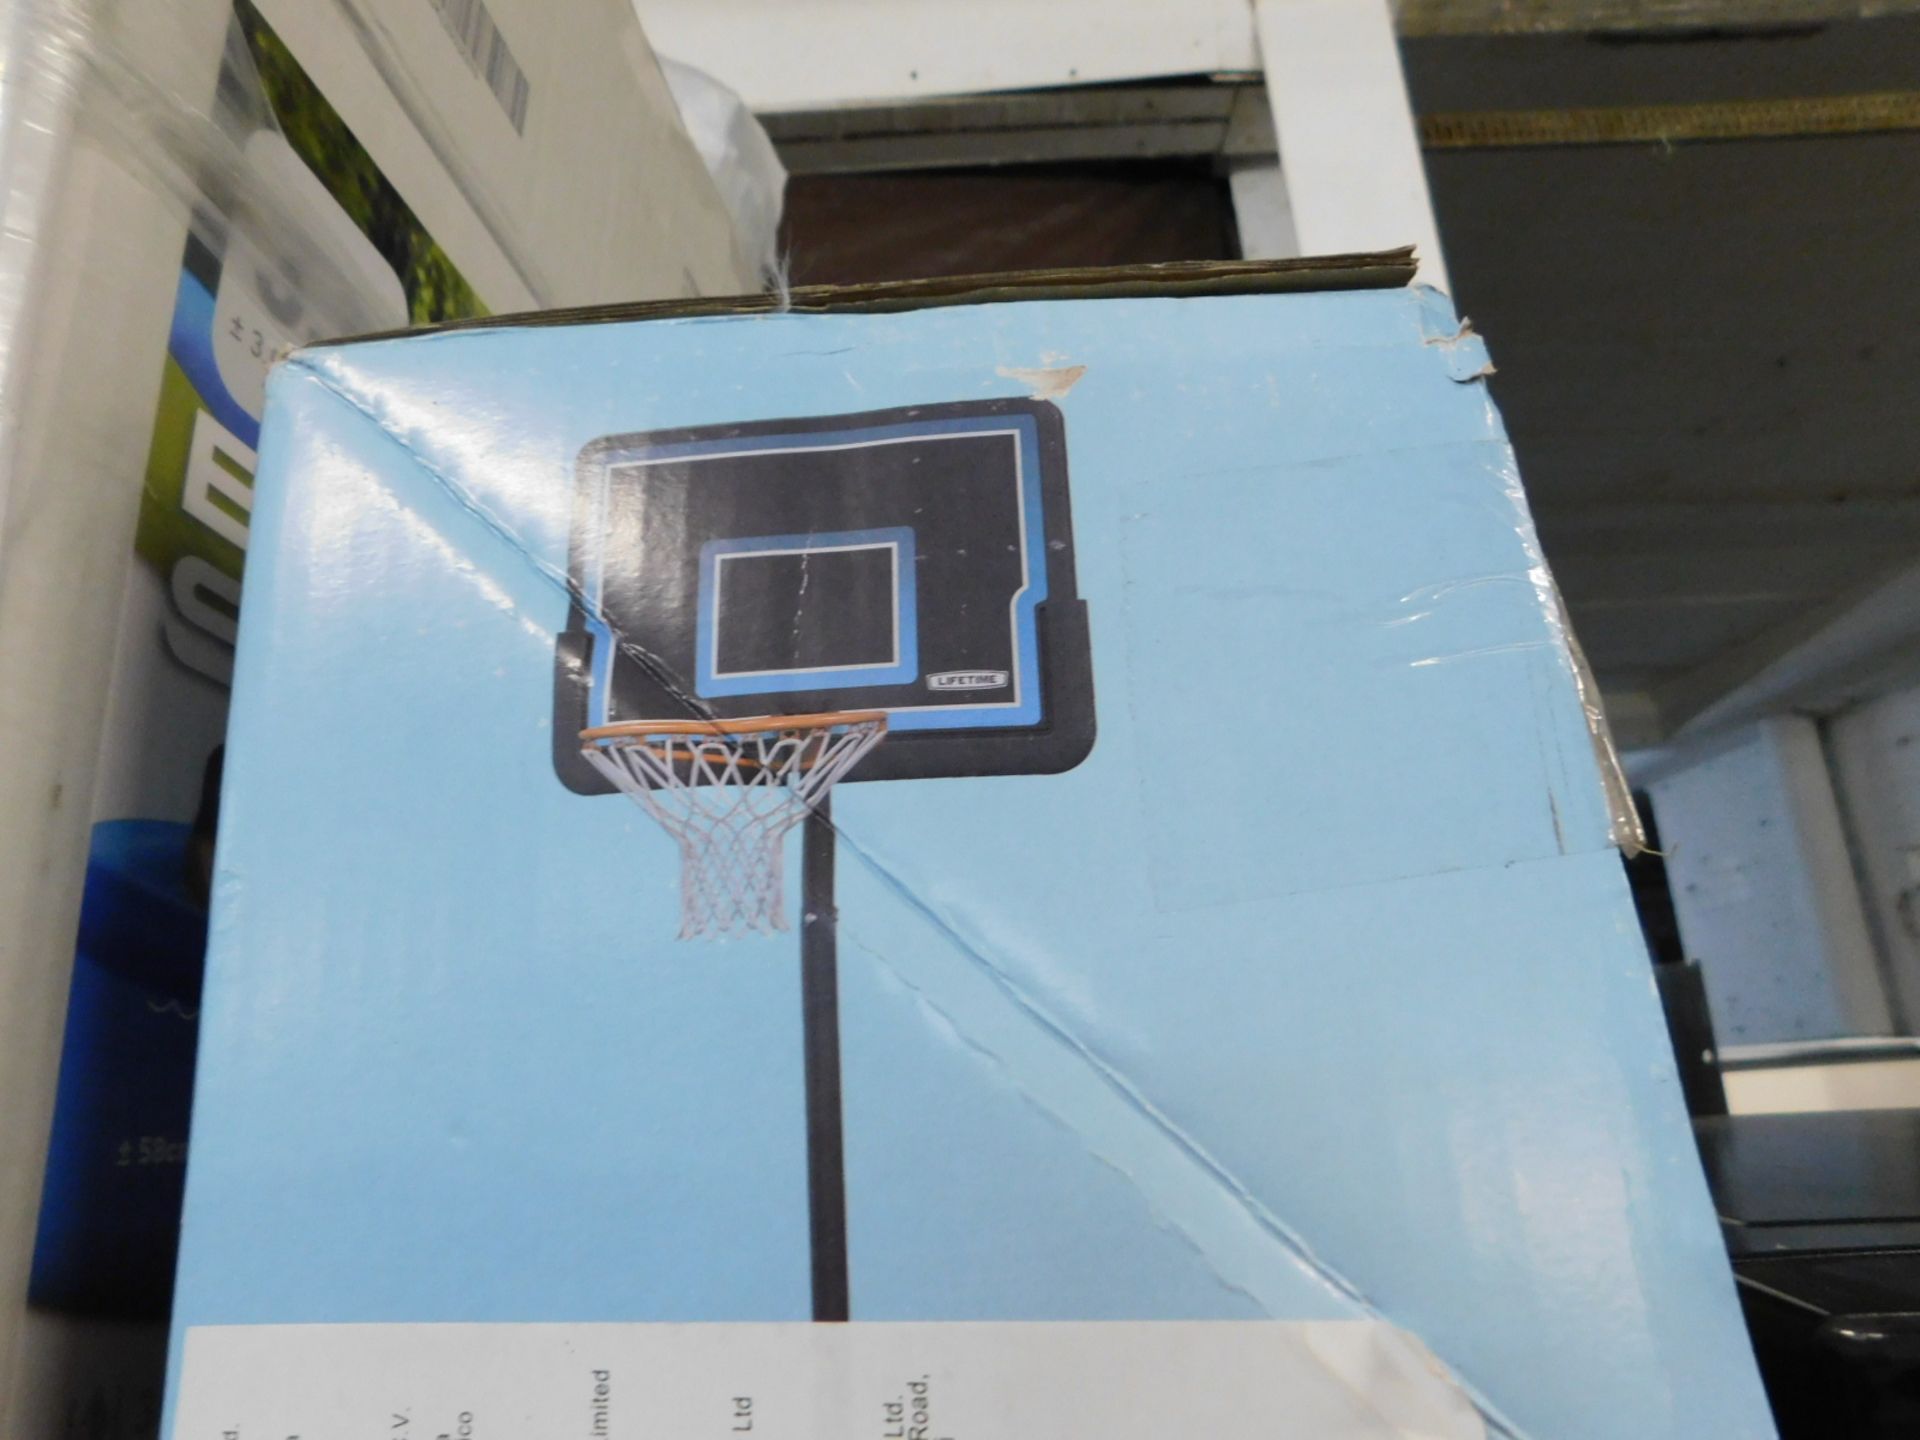 1 BOXED LIFETIME 32 INCH (81.28 CM) YOUTH PORTABLE BASKETBALL HOOP RRP Â£99 (PICTURES FOR